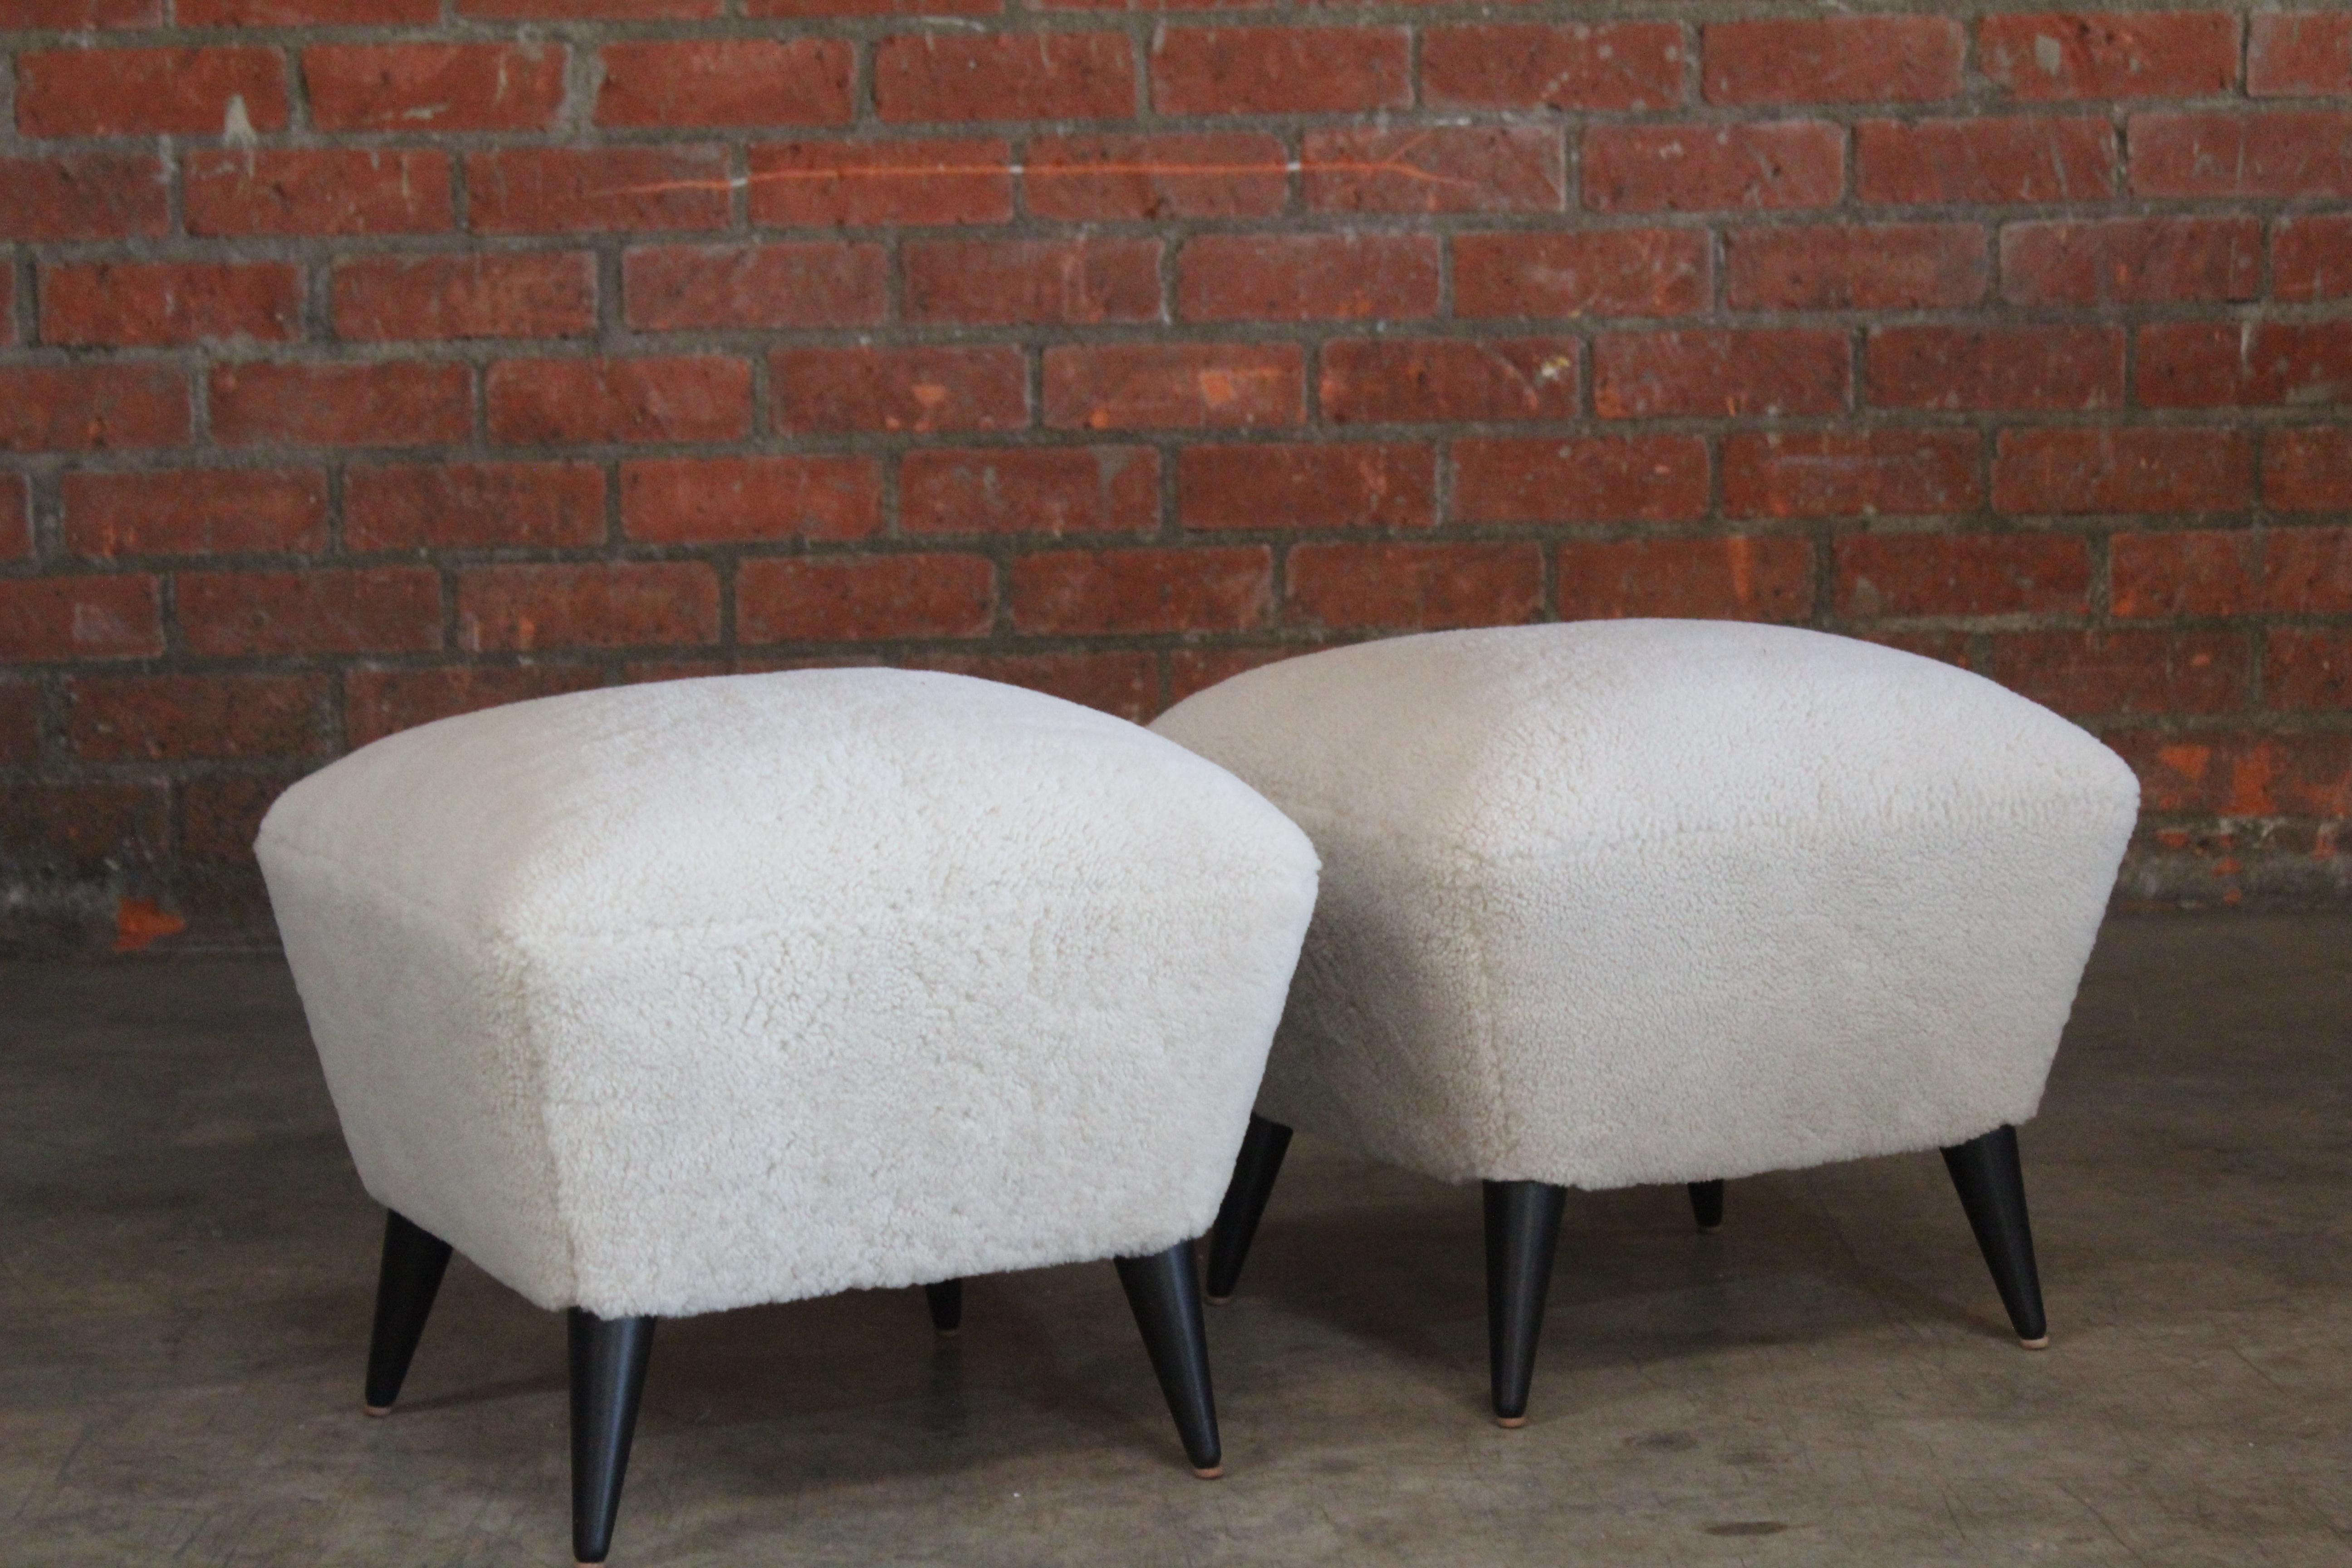 Pair of vintage ottomans by Henri Caillon for Erton, France, 1956. The pair have been completely restored and reupholstered in sheepskin hides. The walnut legs have been refinished satin black. Original tags still present. Sold as a pair.